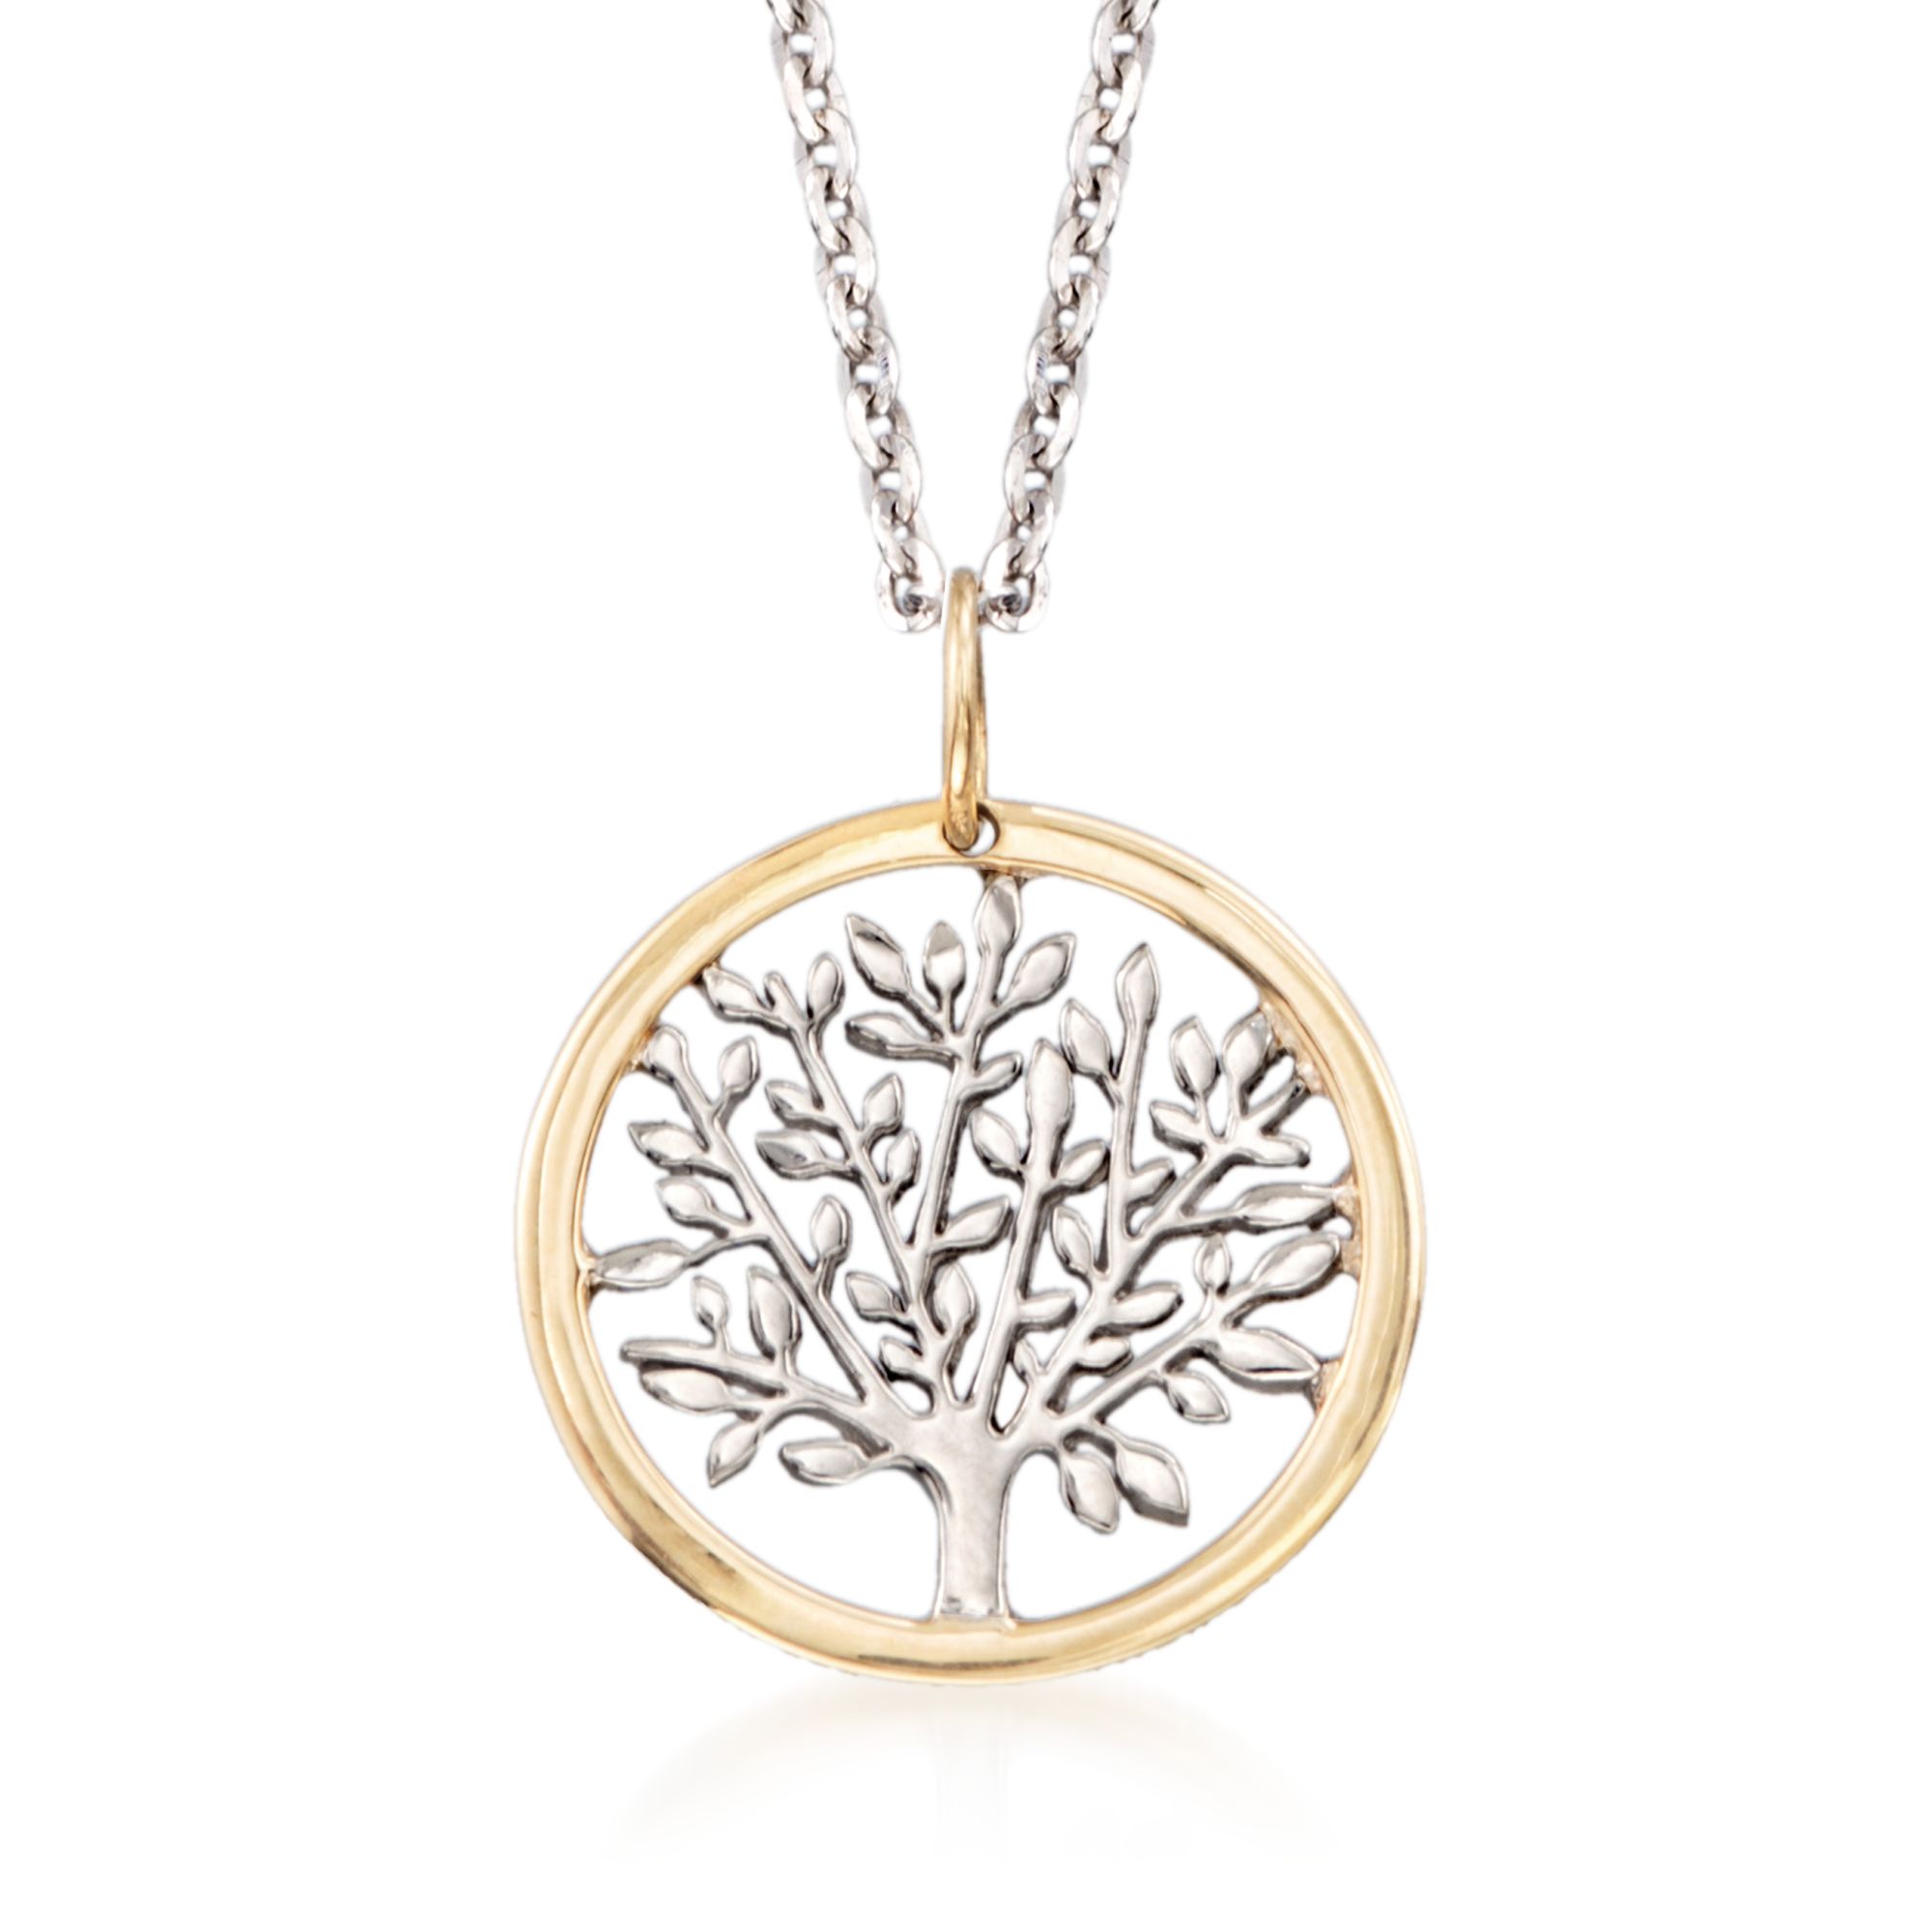 Jewel Zone US Tree of Life Pendant Necklace with Simulated Gemstone 14k Yellow Gold Over Sterling Silver 